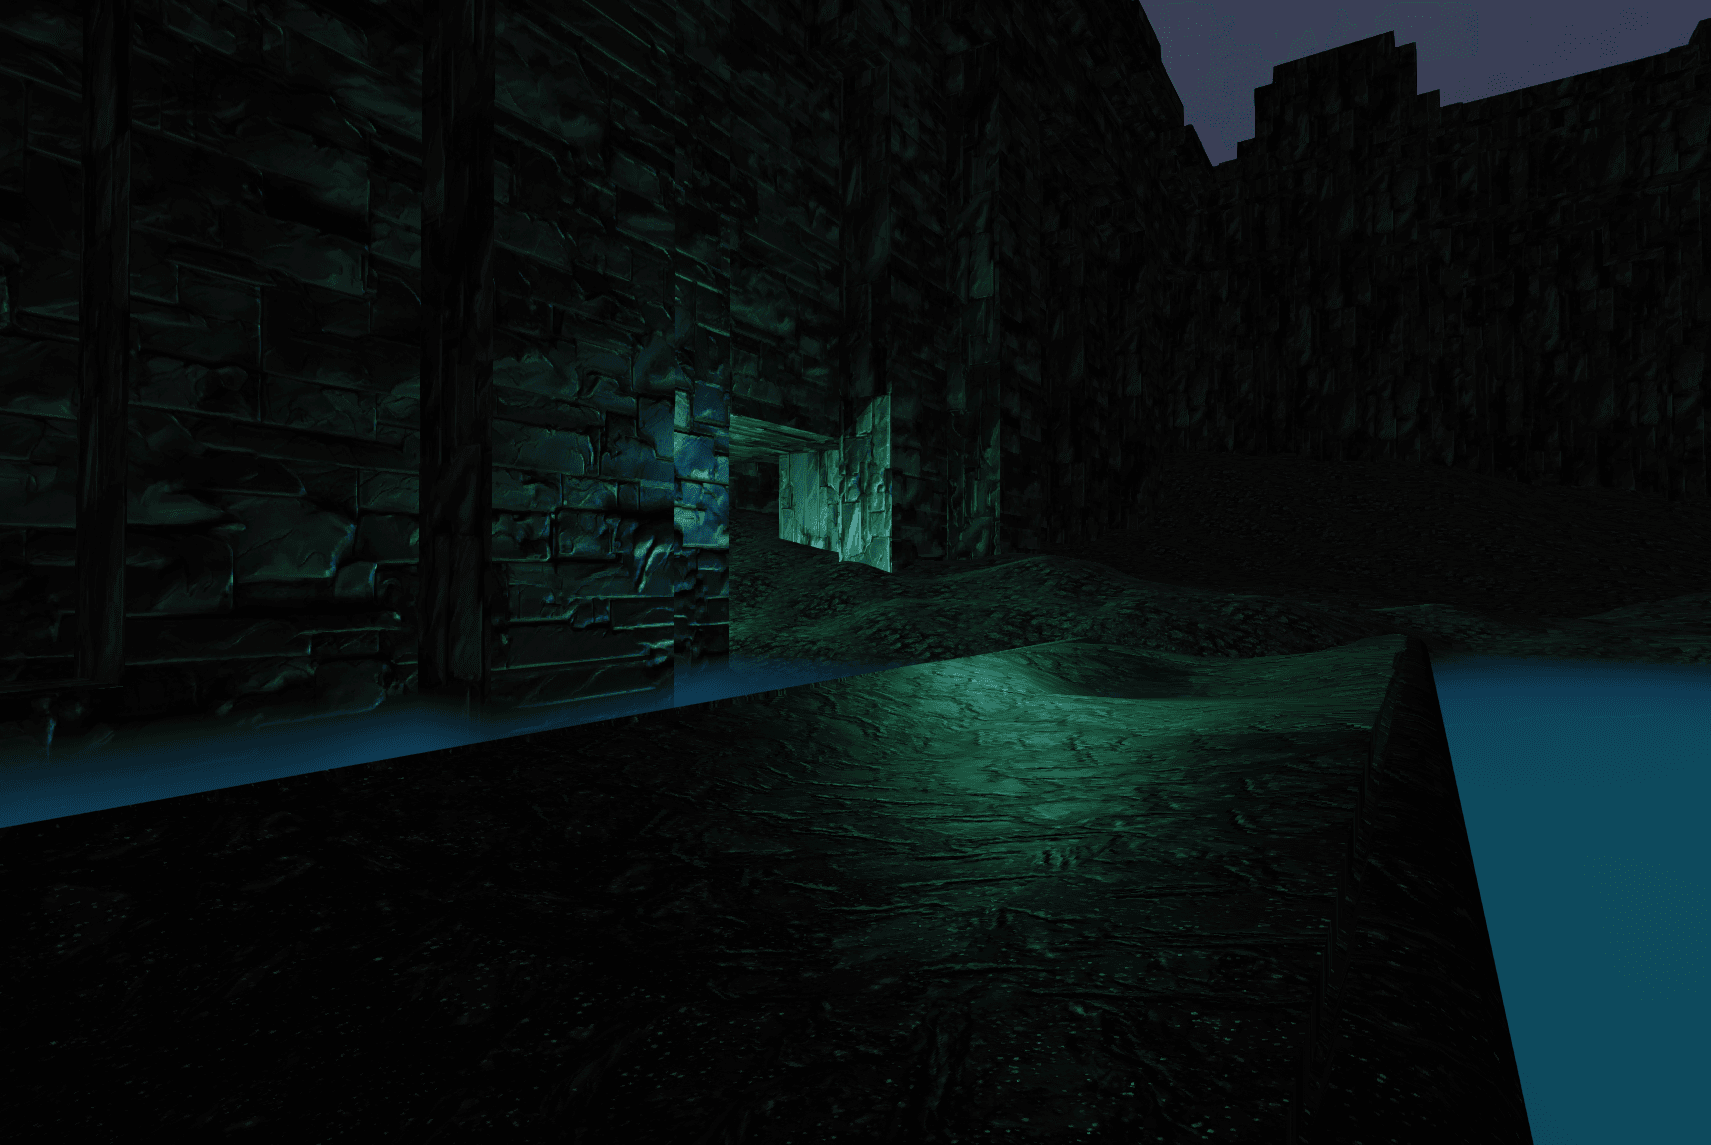 A screenshot of the cave level rendered with Three.JS.  It shows a large gray stone wall with a door in the bottom, illuminated by an eerie green light.  The player is standing on a shiny stone walkway/bridge which crosses over a depression in the terrain which is filled with blue volumetric fog.